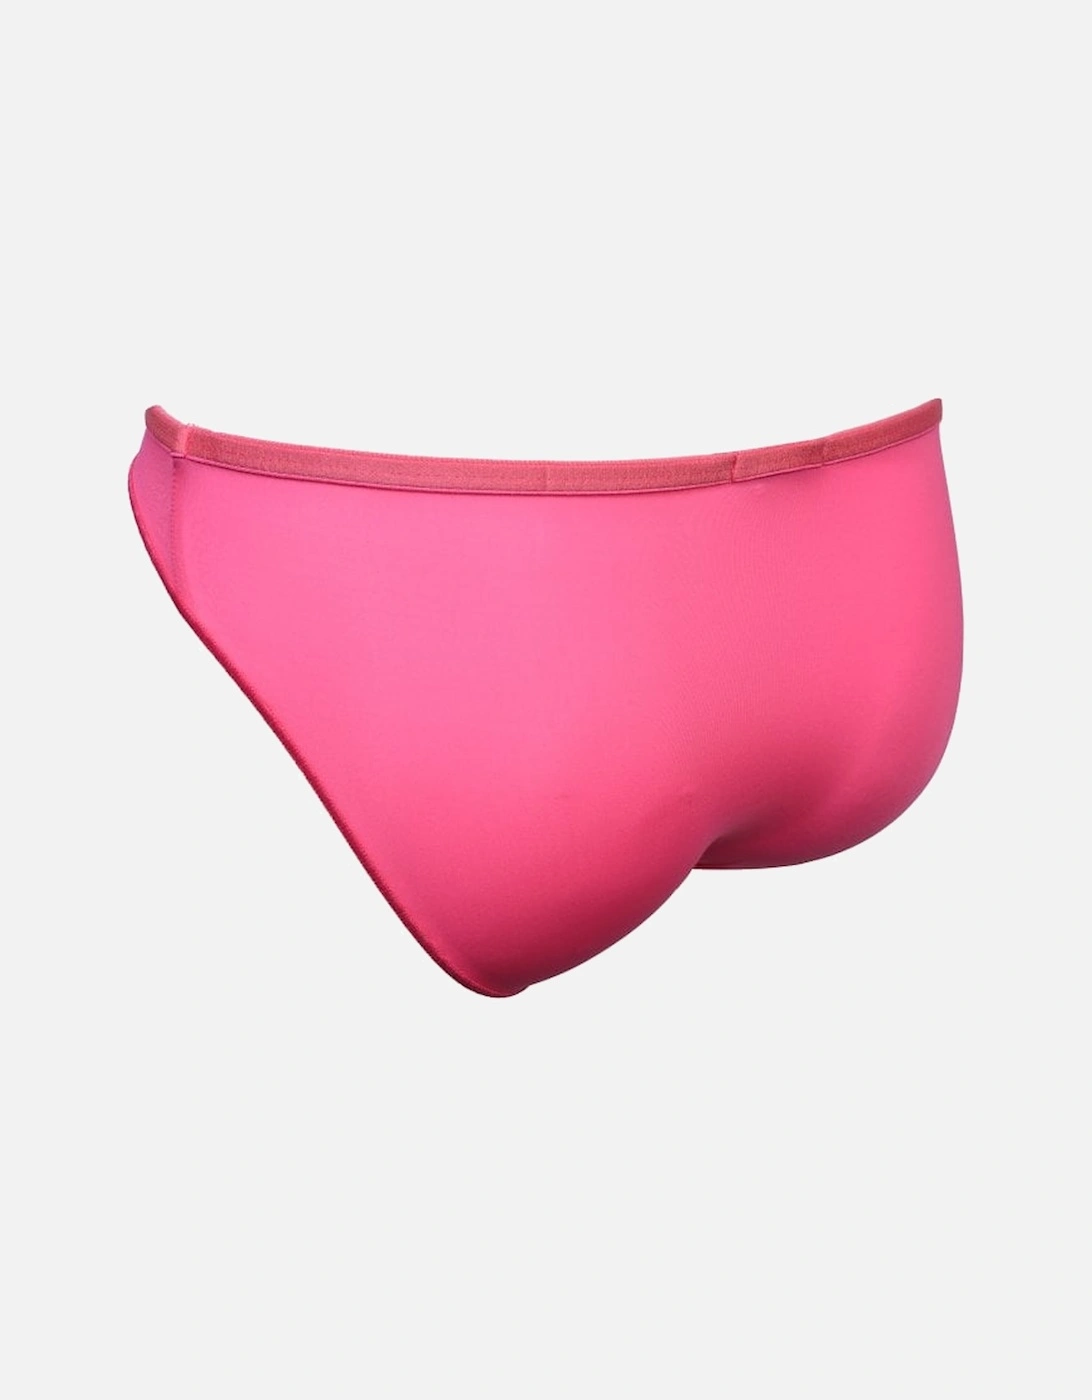 Plume Micro Brief, Pink